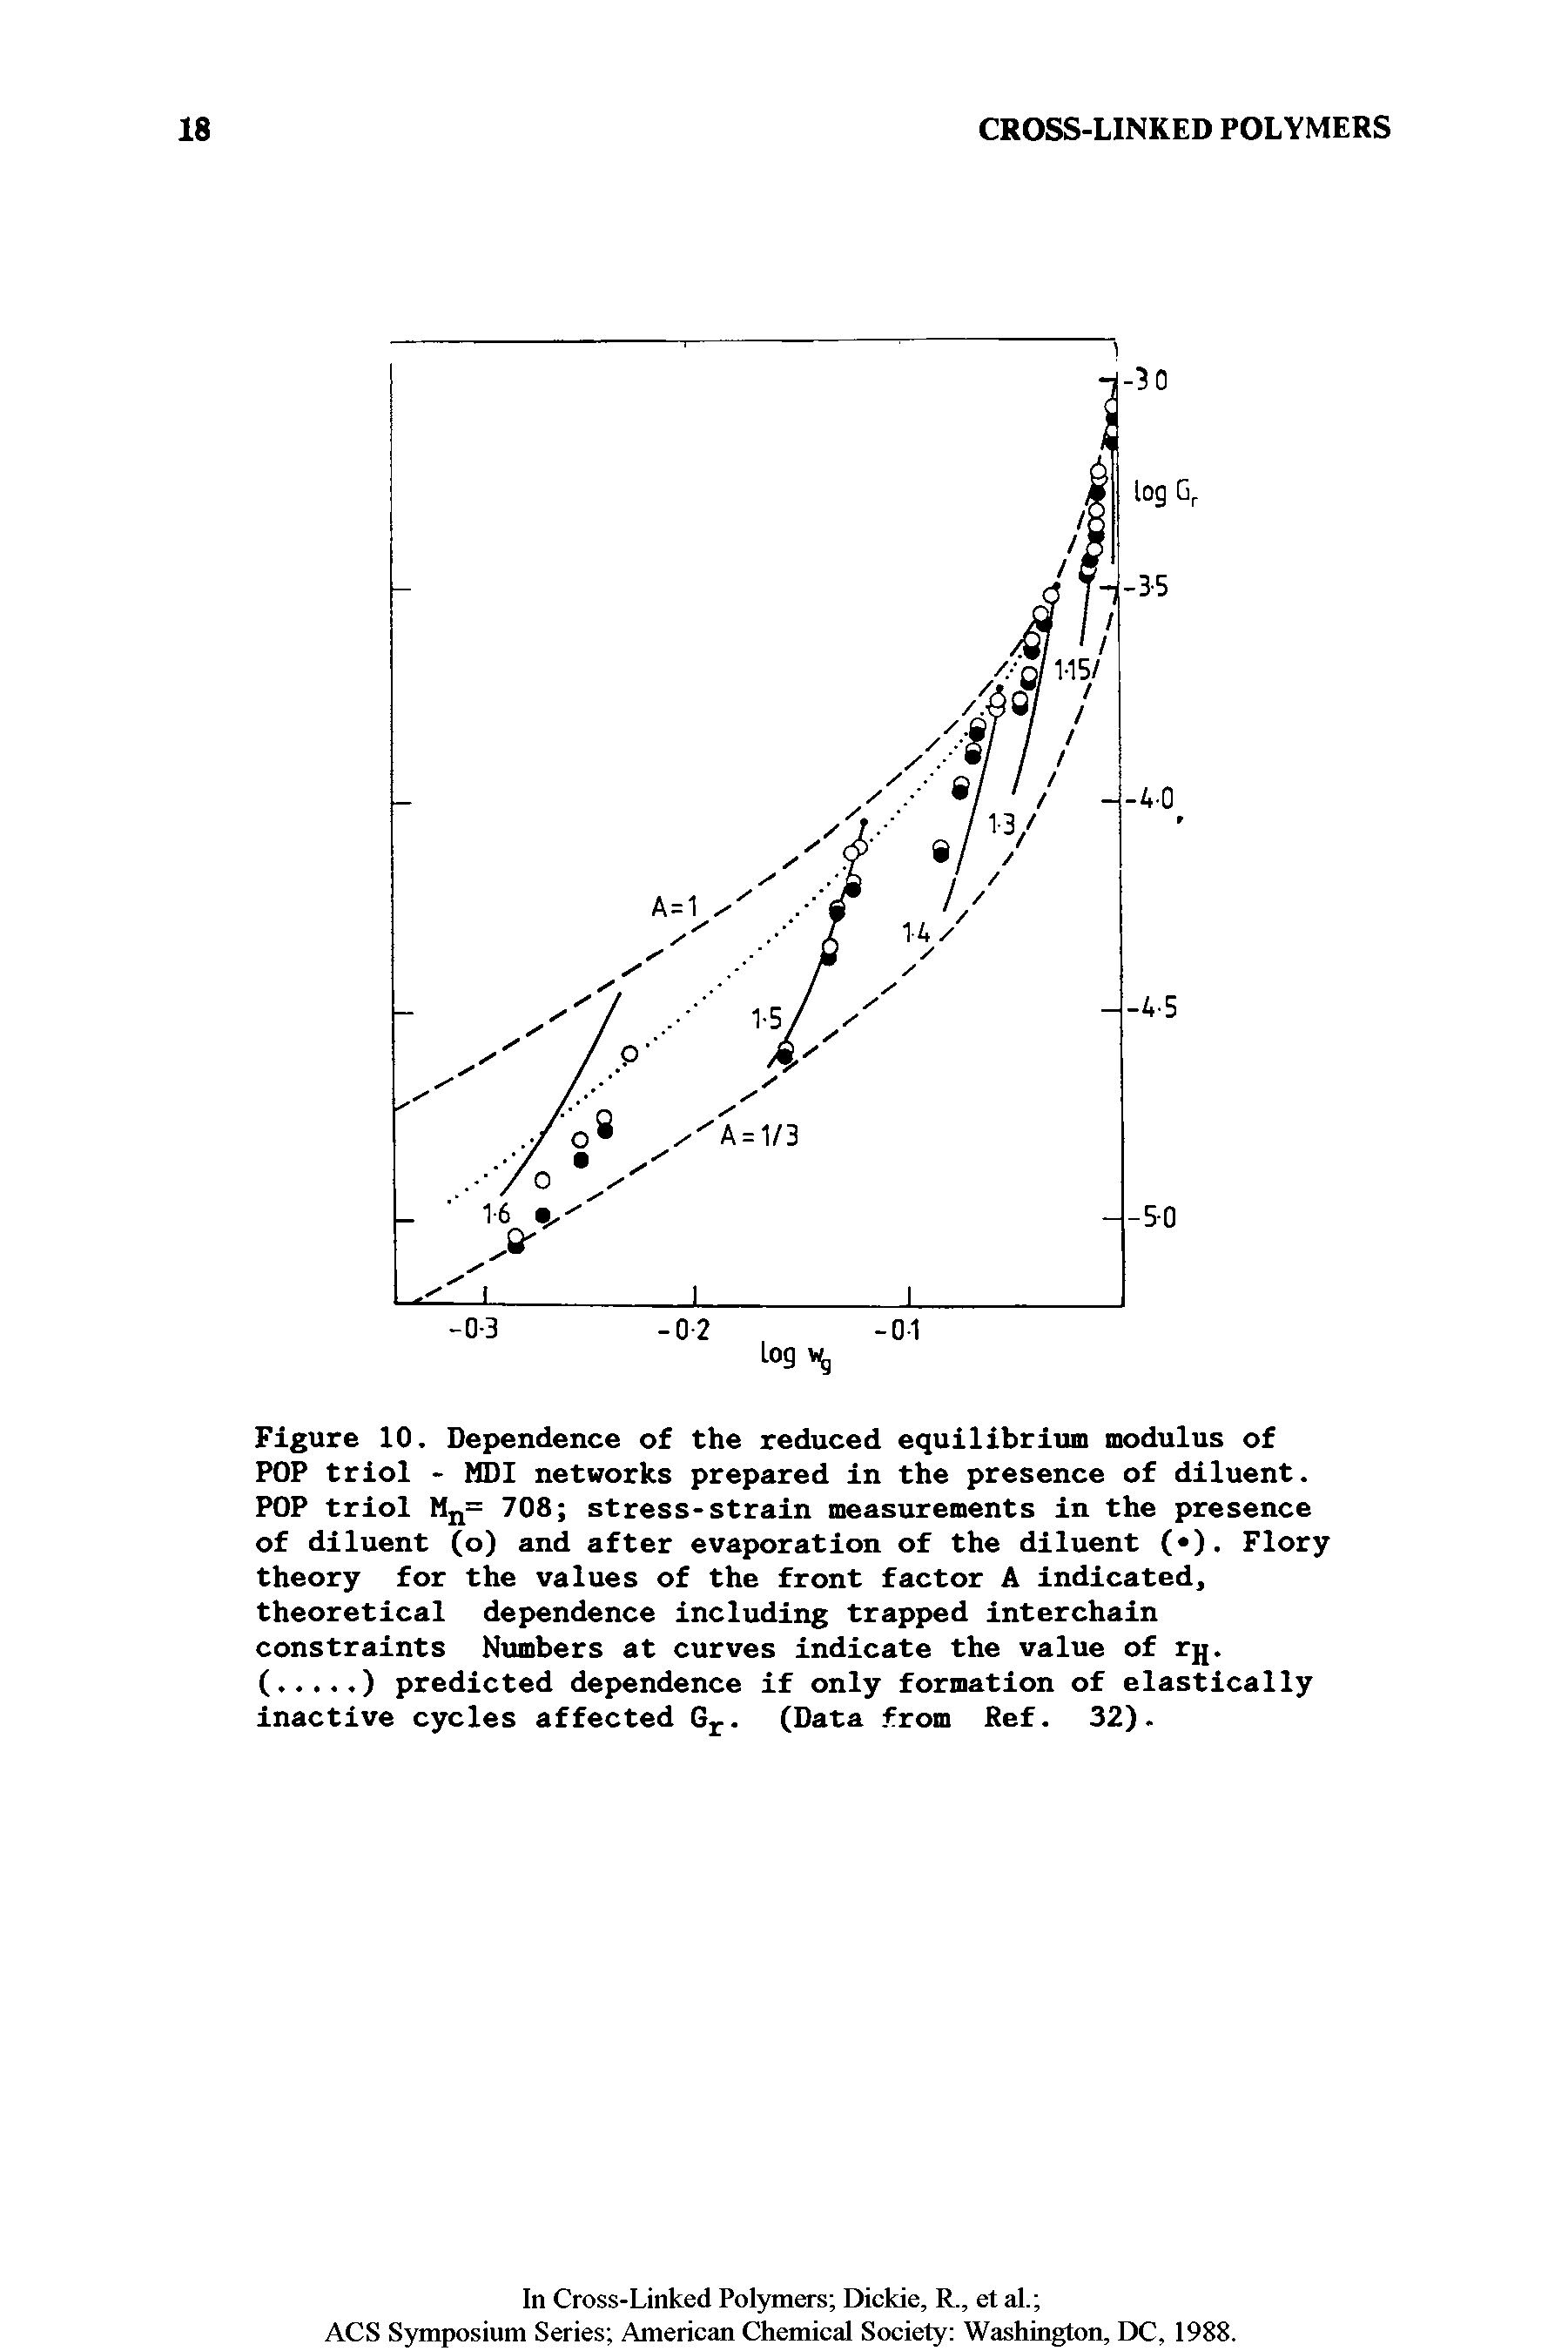 Figure 10. Dependence of the reduced equilibrium modulus of POP triol - MDI networks prepared in the presence of diluent. POP triol Mu= 708 stress-strain measurements in the presence of diluent (o) and after evaporation of the diluent ( ). Flory theory for the values of the front factor A indicated, theoretical dependence including trapped interchain constraints Numbers at curves Indicate the value of ry.